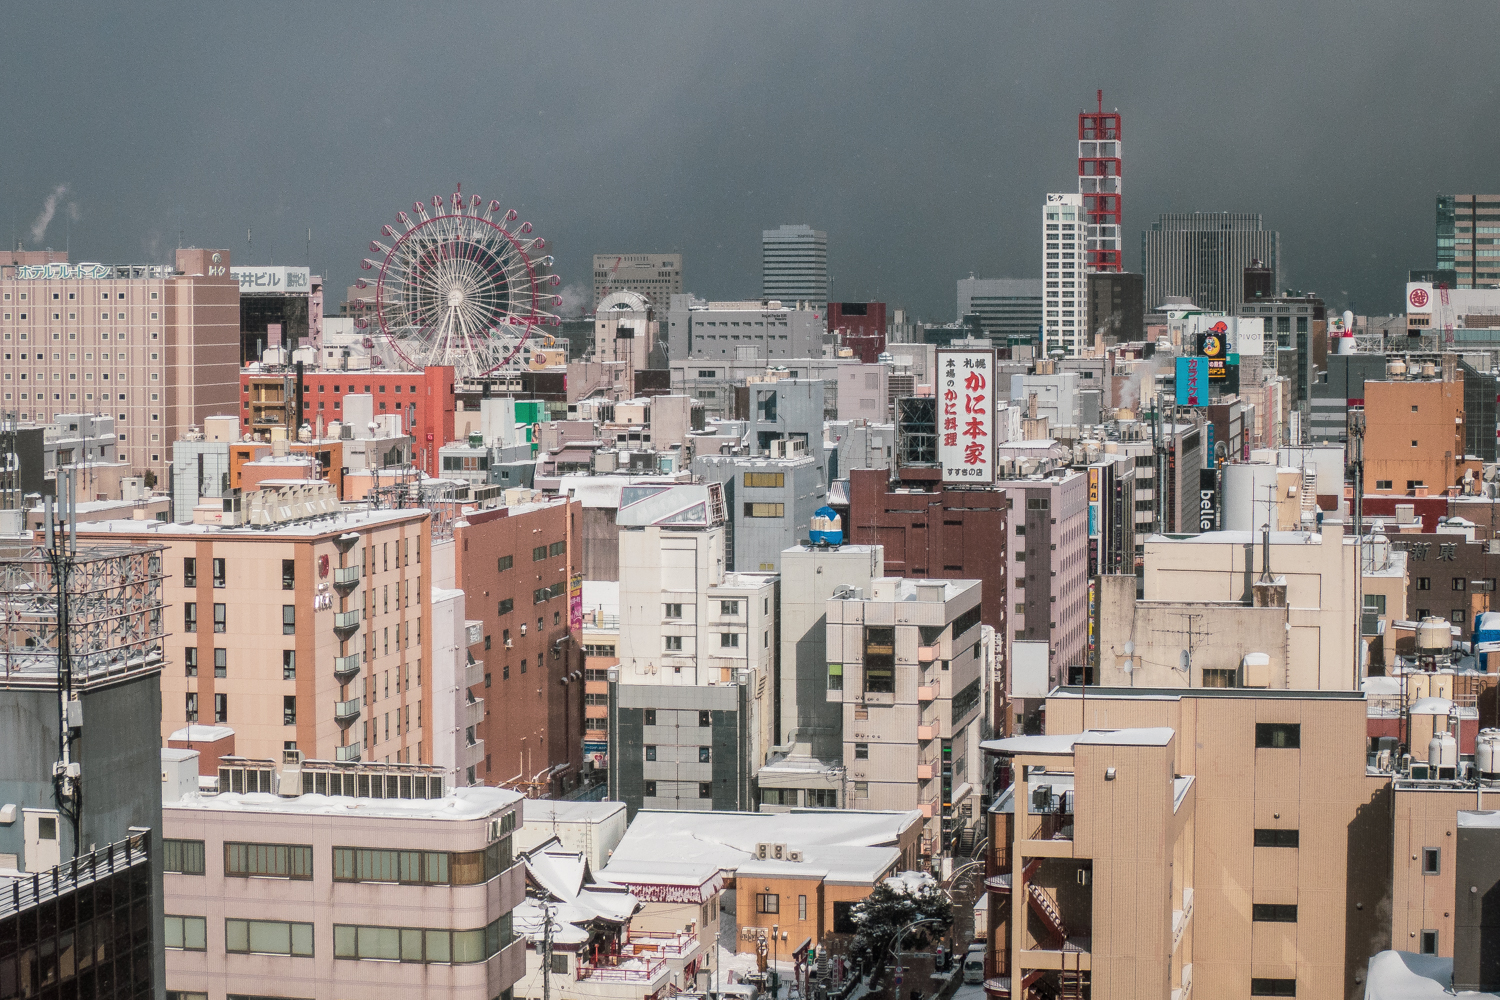  Sapporo, the 5th largest city in Japan, enjoys a quick break in the weather. 